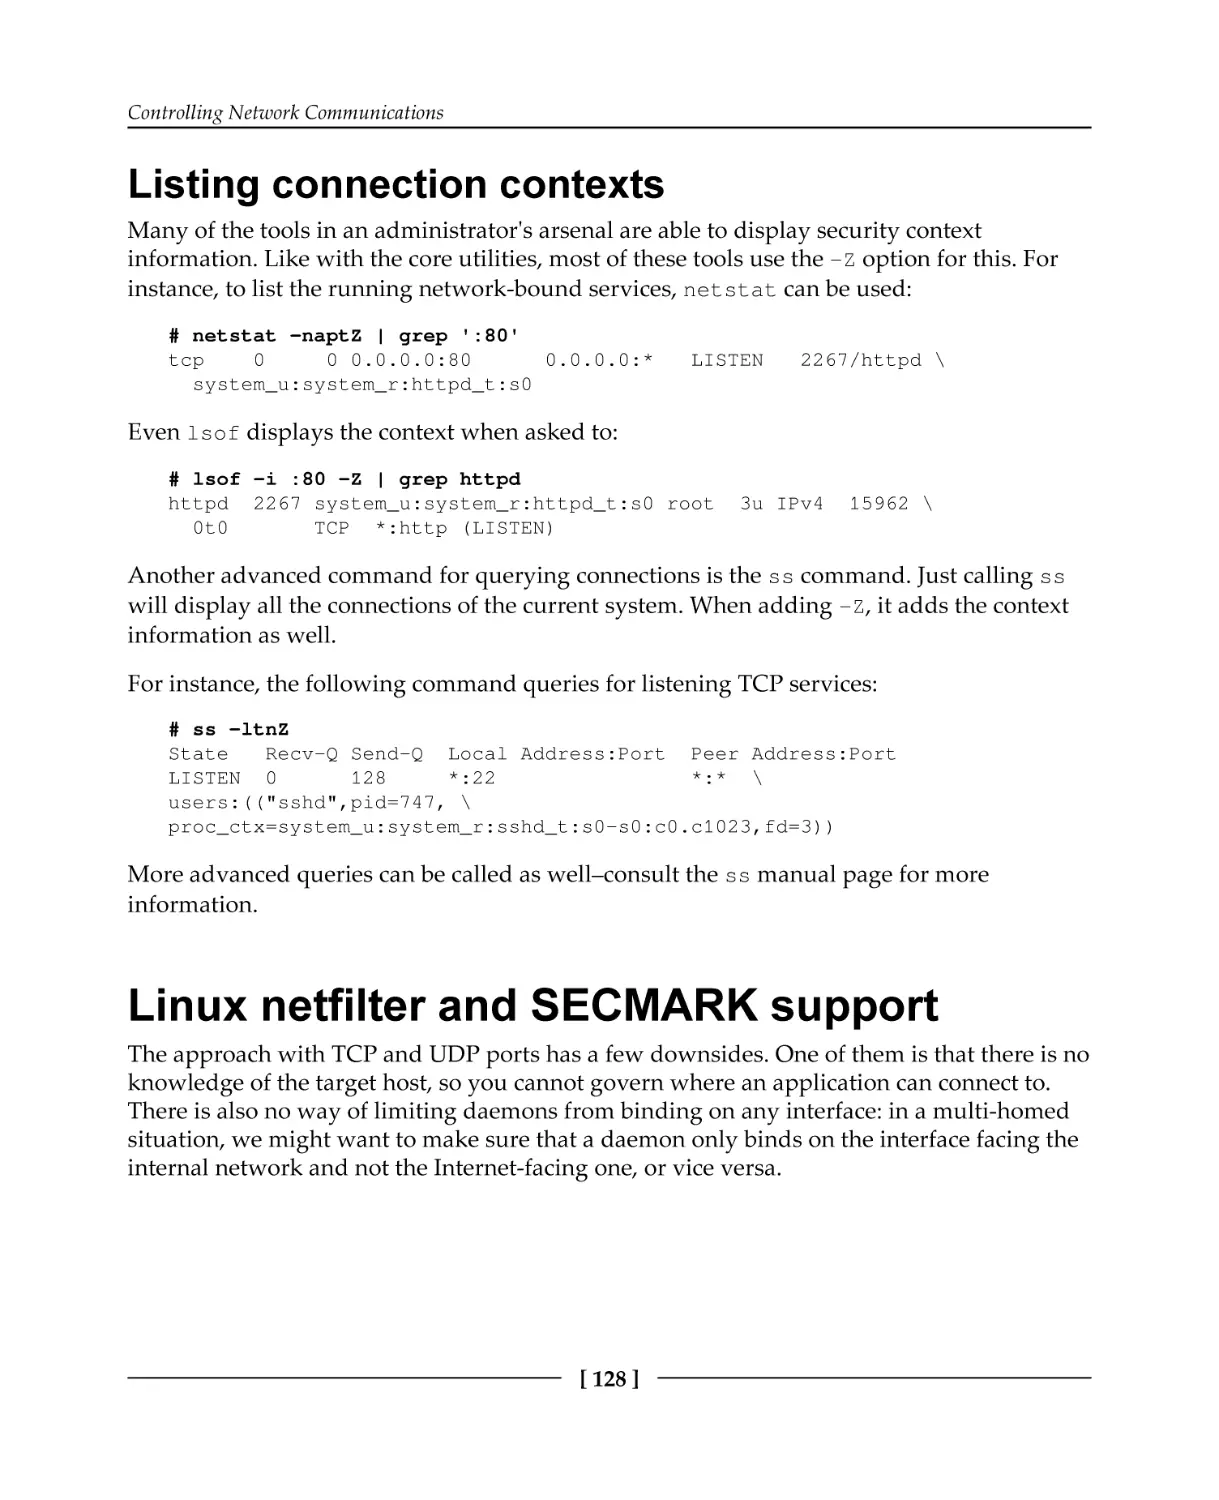 Listing connection contexts
Linux netfilter and SECMARK support